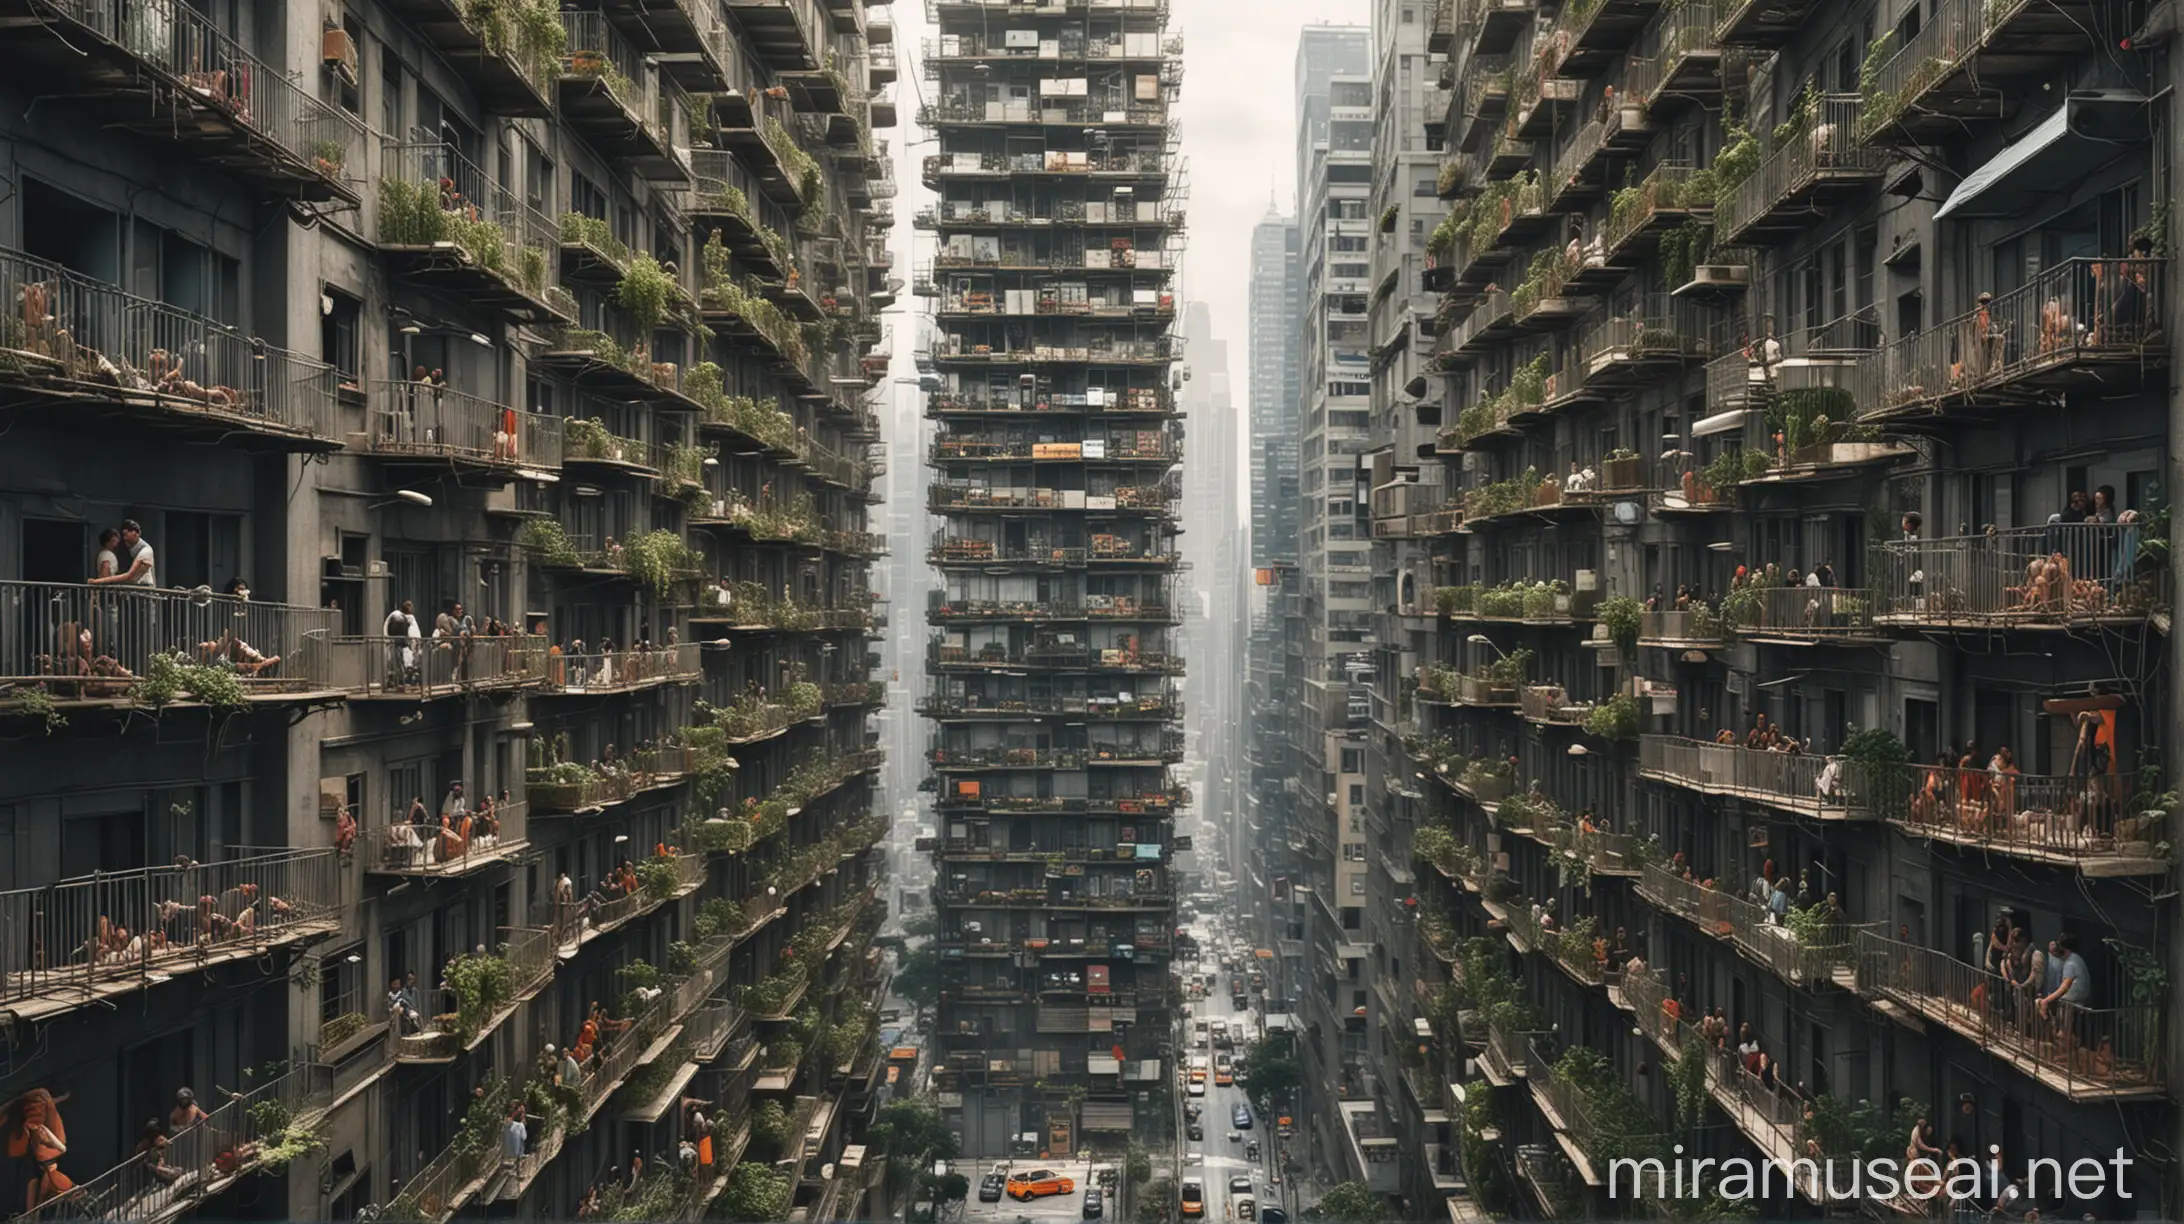 in foreground, Create a series of super skyscrapers with balconies full of people interacting with each other.
Some people are visible behind bars or grates (like in jail), emphasizing overcrowding. 
As landscape,In the background, insert a city full of skyscrapers and chaotic traffic. sensation of a urban jungle. realistic.